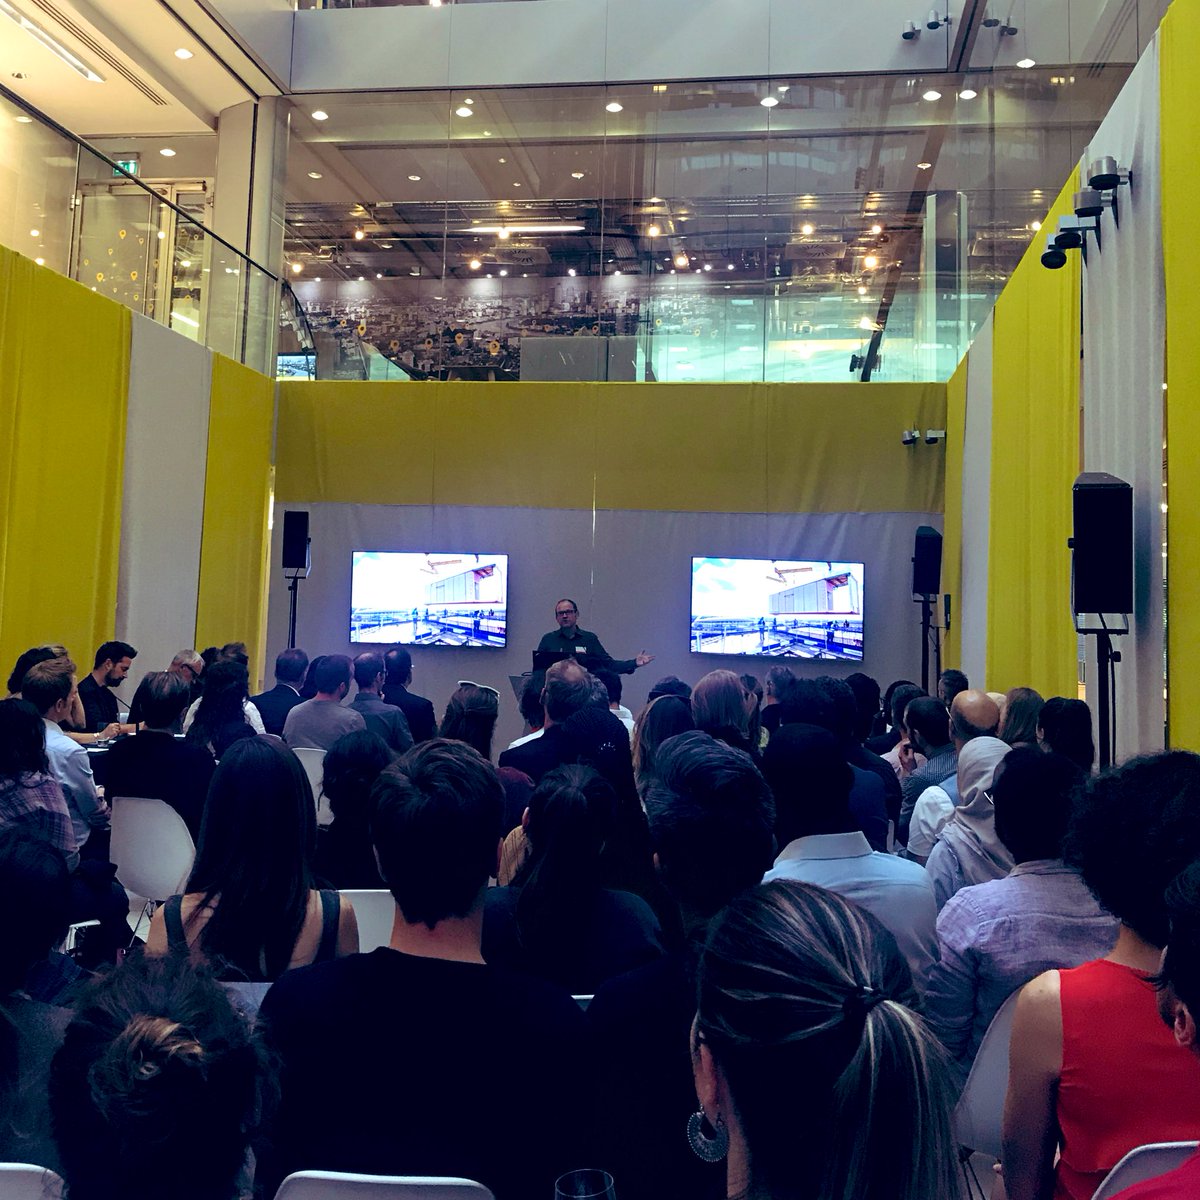 .@sibaylius presenting tonight on adaptable and flexible housing that is fully responsive to the changing needs of an ageing population @HOKLondon for the #LFA @ArchibooLive #boundaries #architectspitch #housing